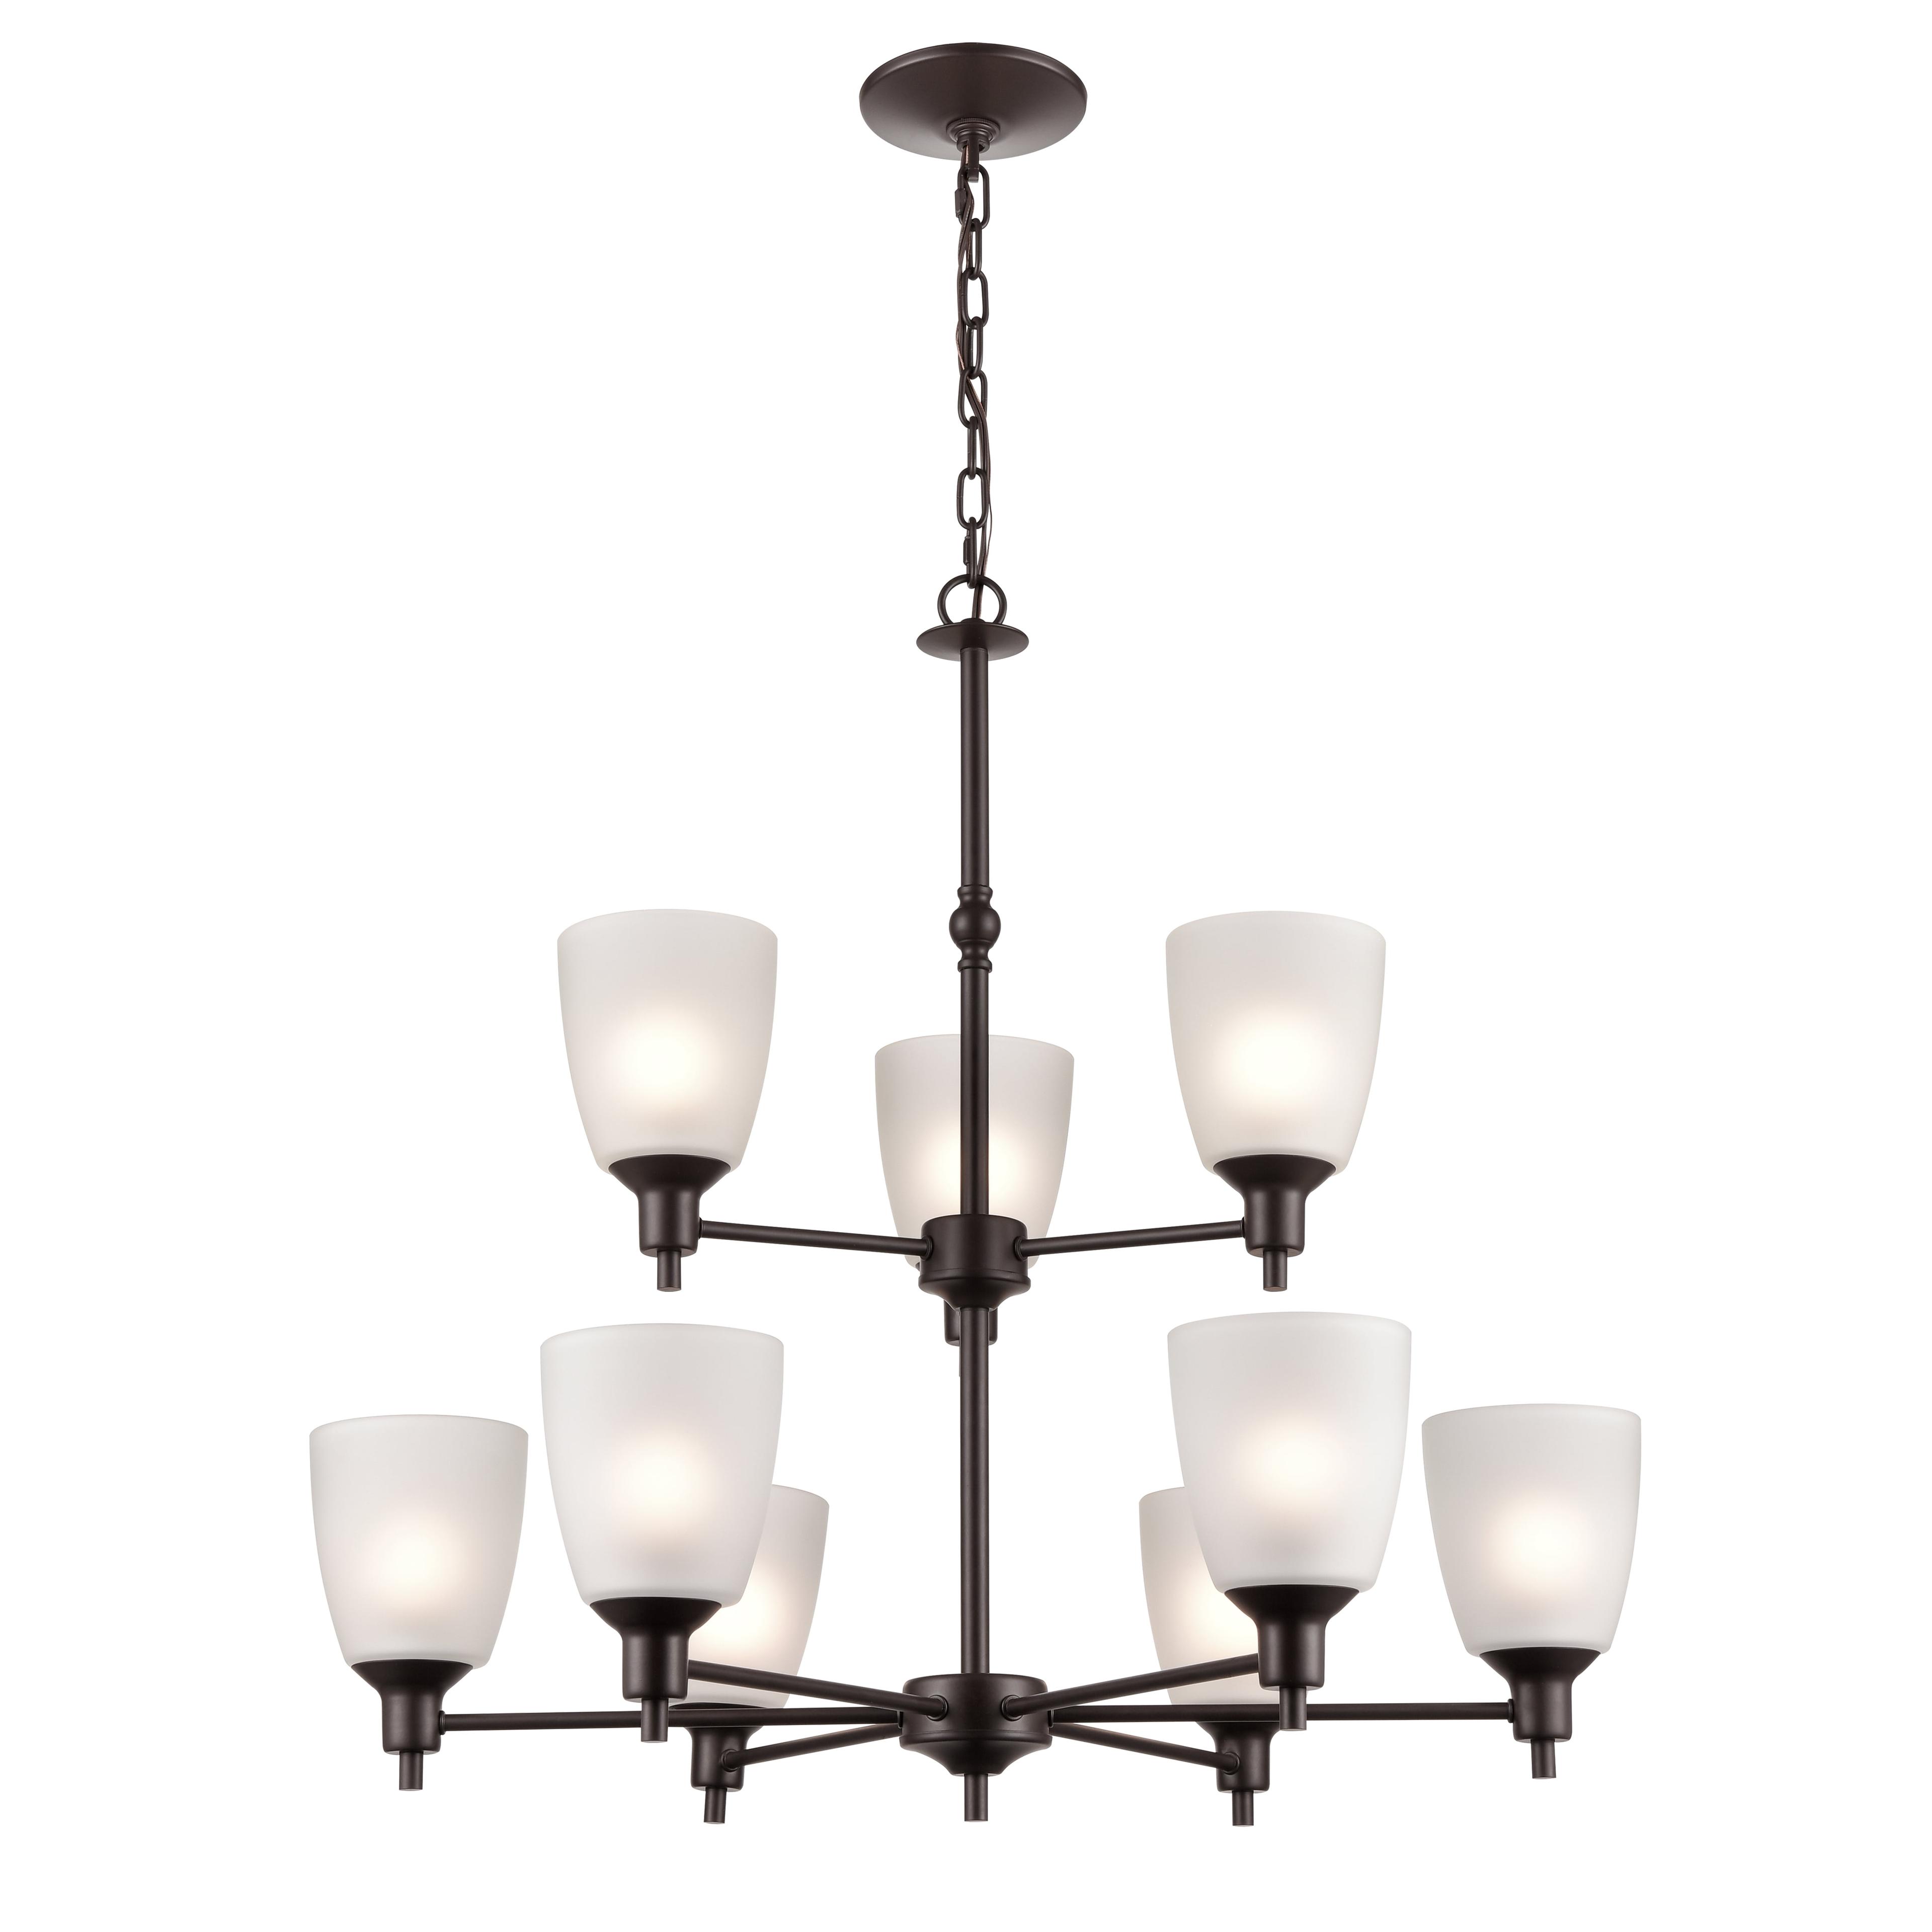 Ashton Park Transitional 9-Light Chandelier in Oil Rubbed Bronze with Frosted Glass Shades